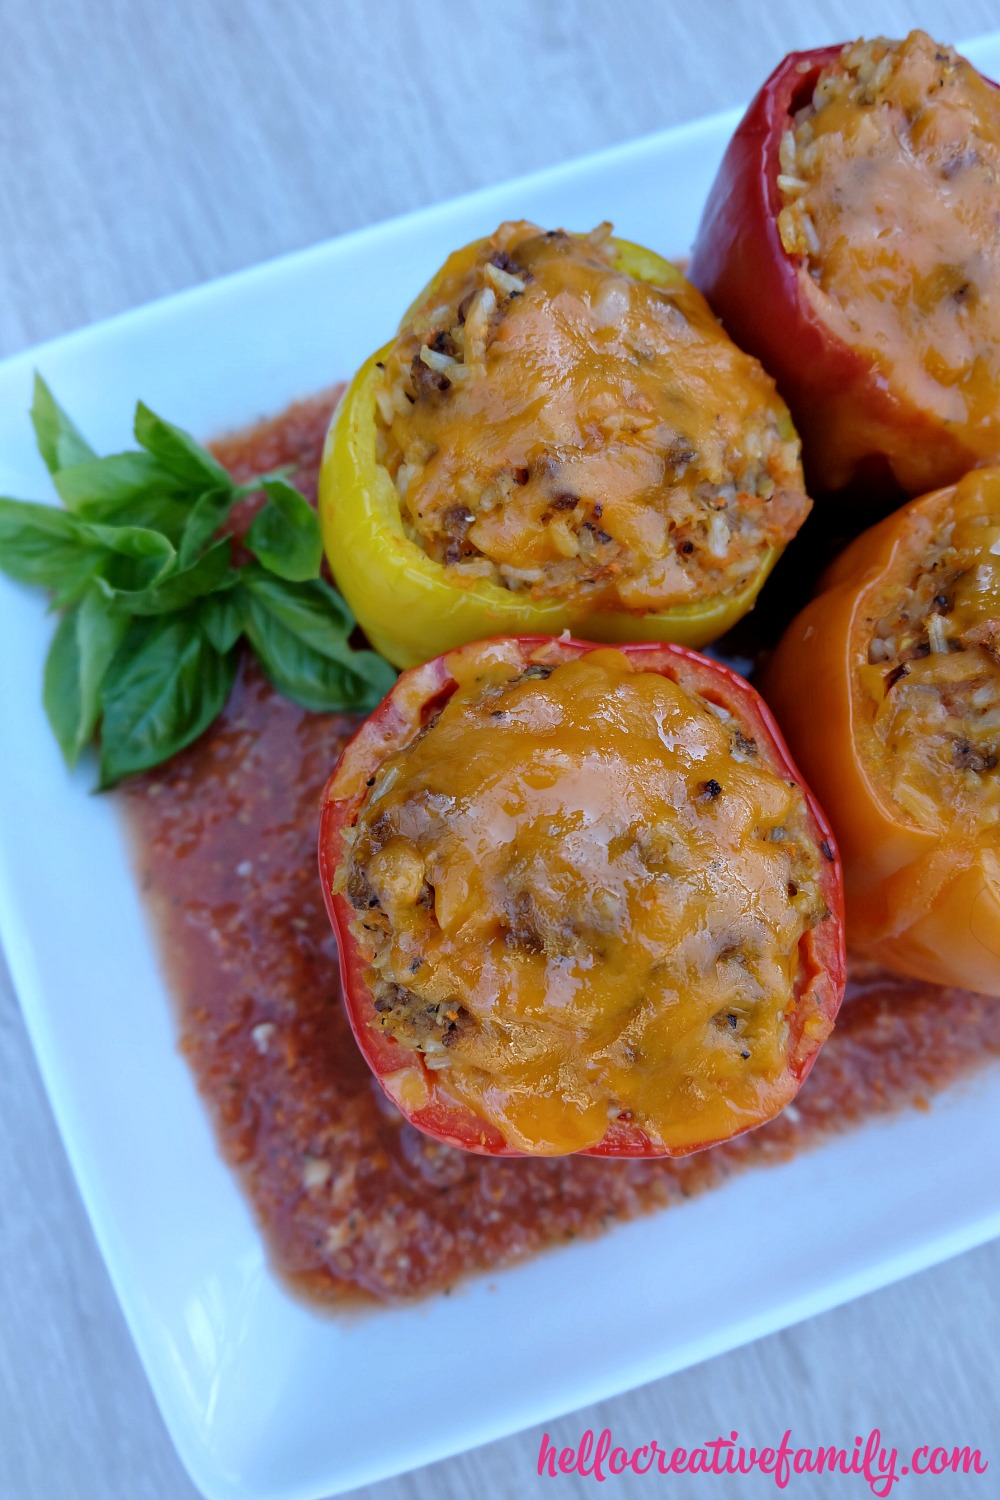 A quick and easy 30 minute weeknight meal idea! Italian Stuffed Bell Peppers Recipe with Rice, Ground Beef and Veggies! Parents will love it's packed full of hidden vegetables and kids will love the taste! 